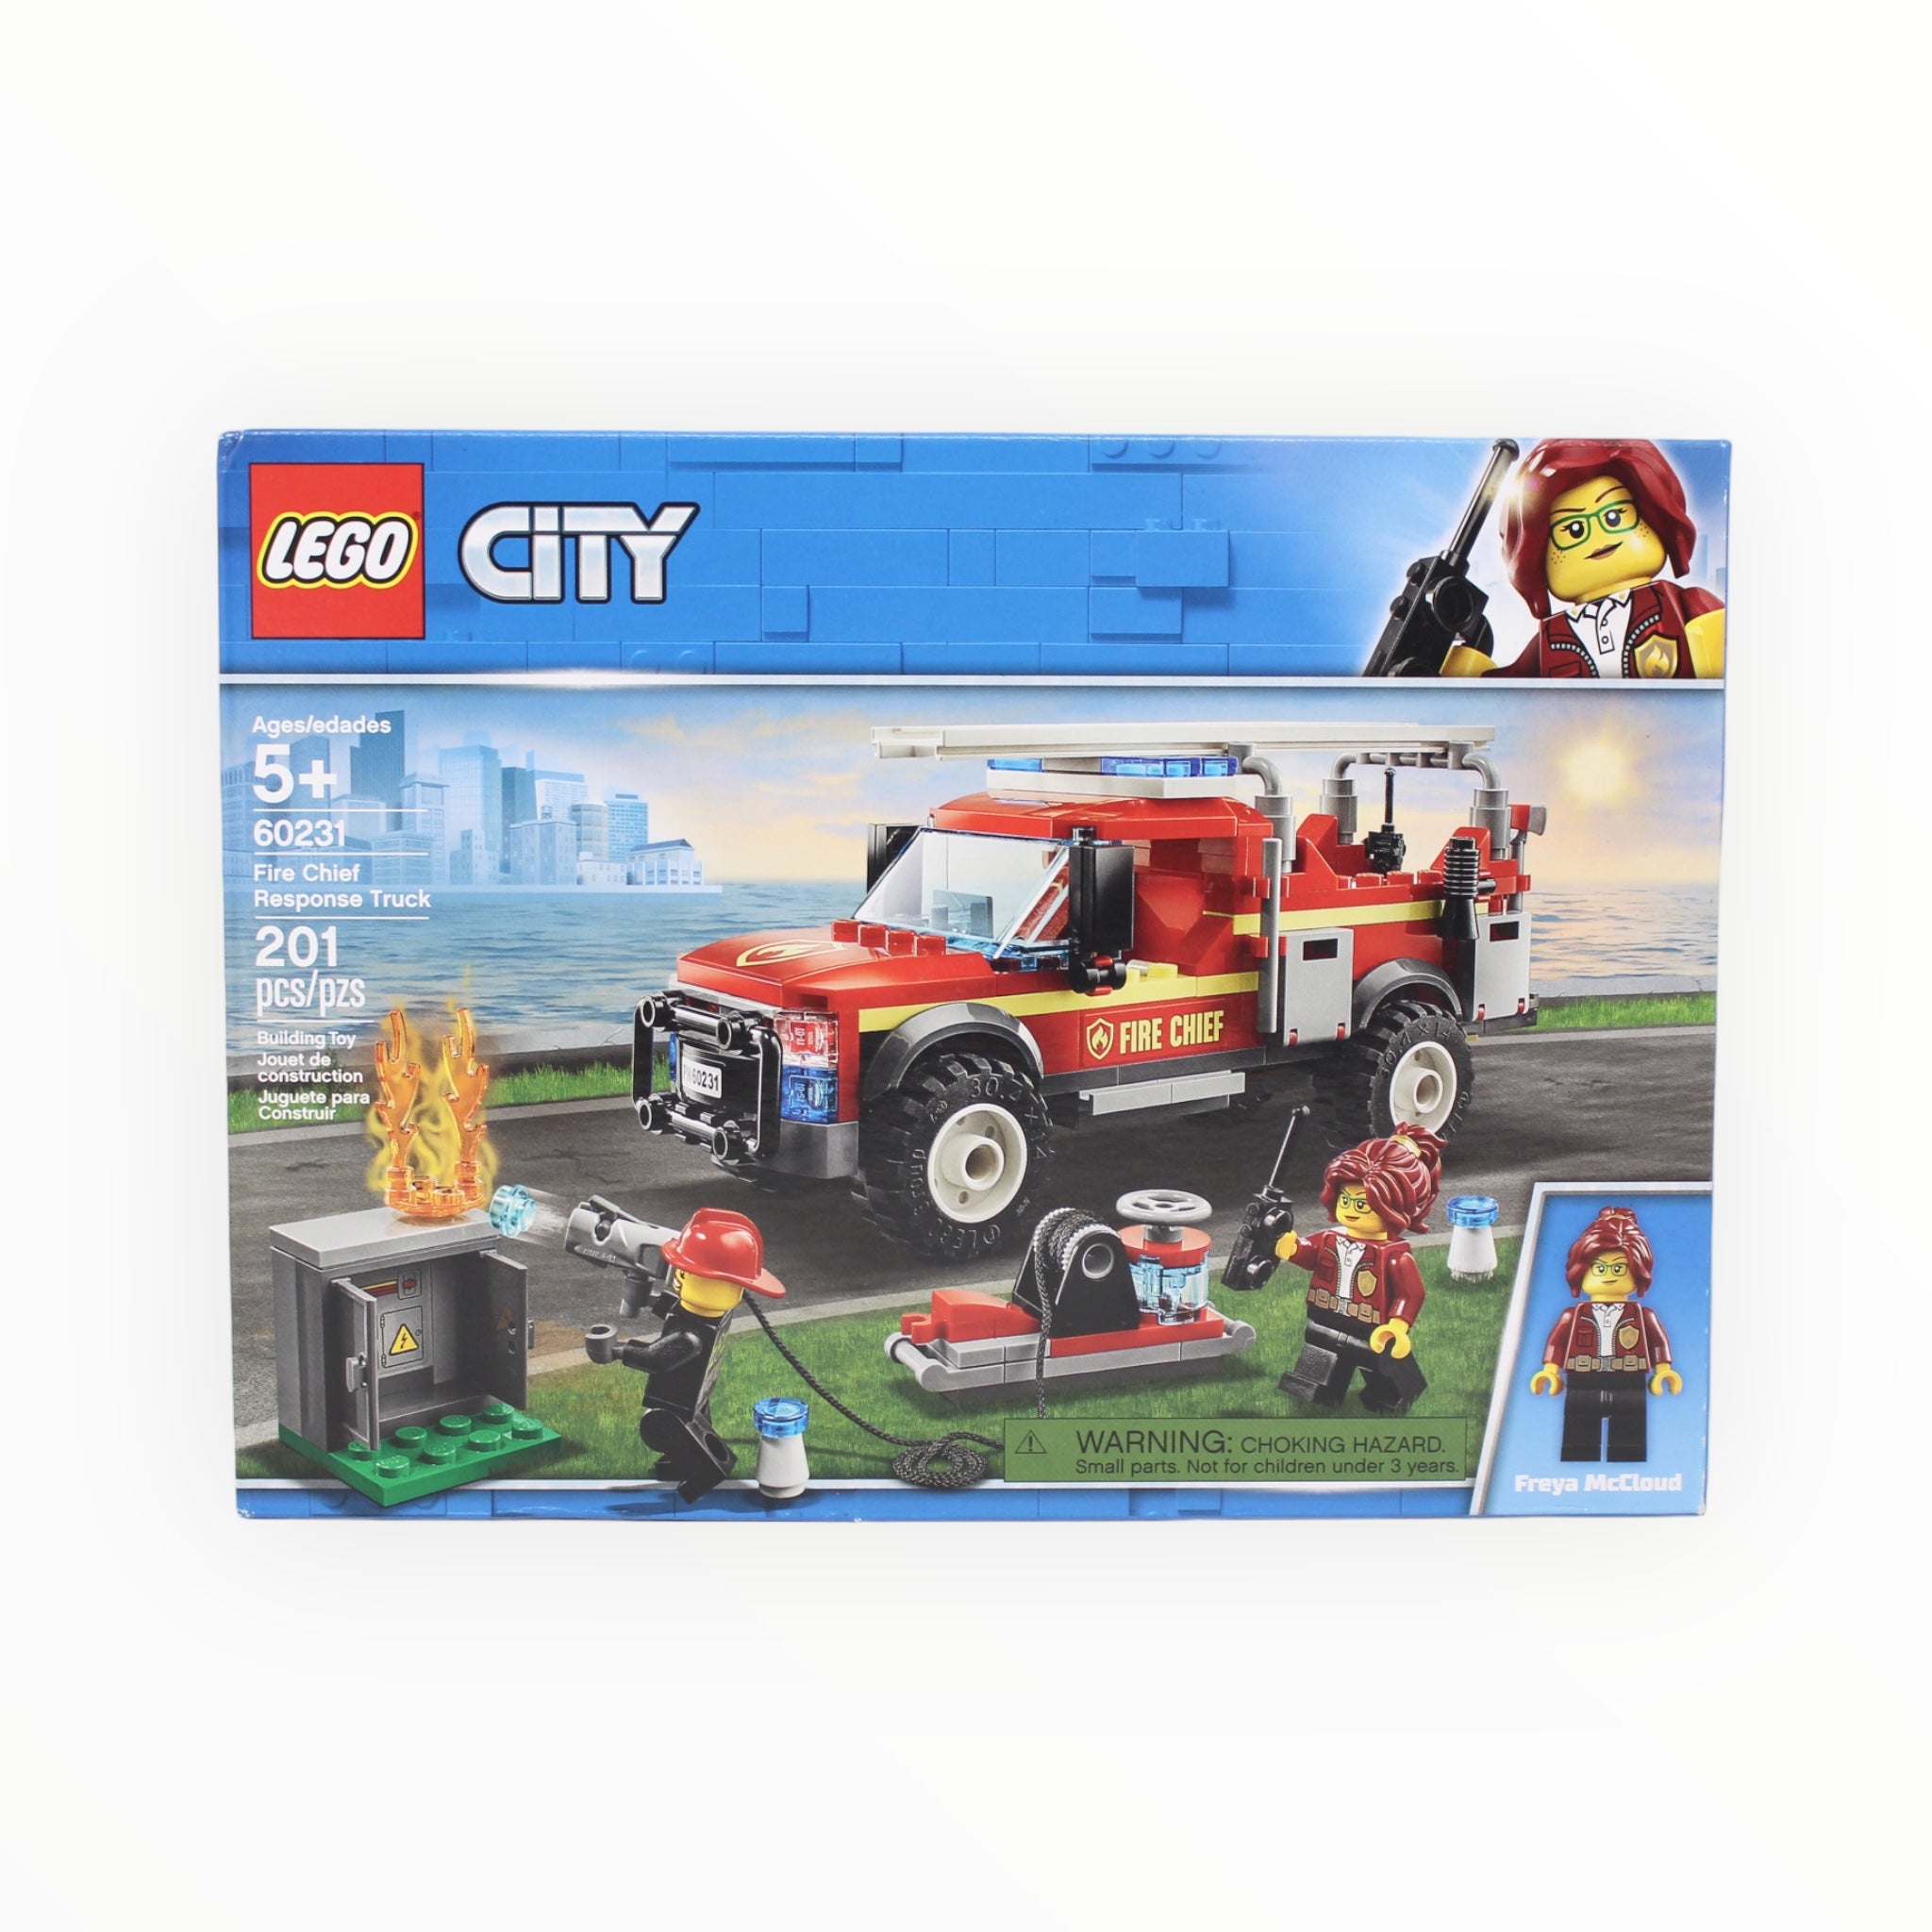 Retired Set 60231 City Fire Chief Response Truck